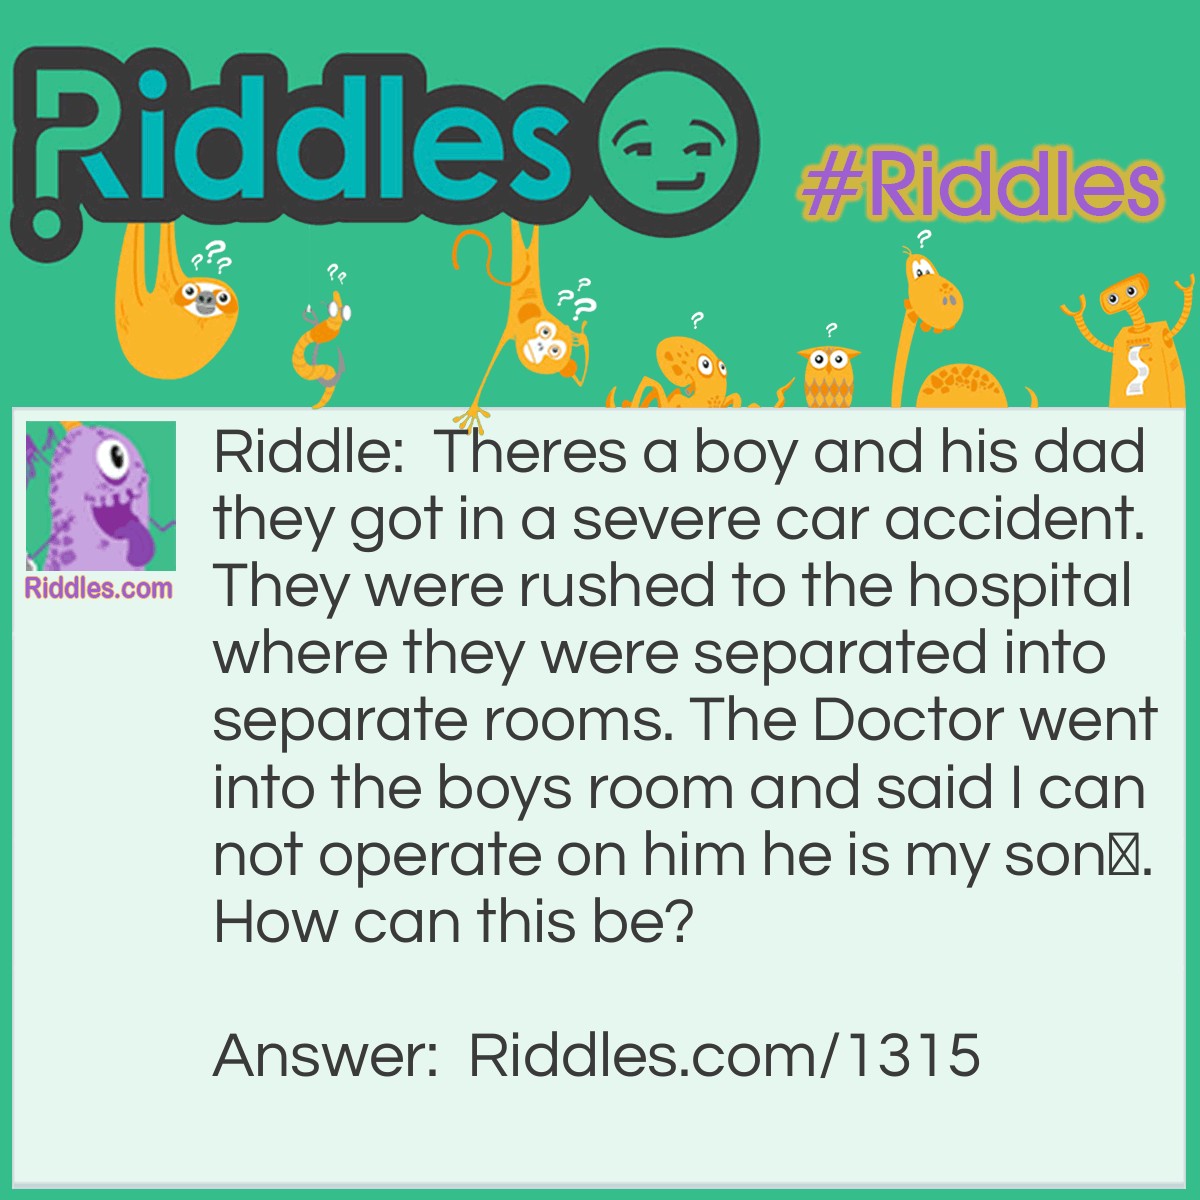 Riddle: Theres a boy and his dad they got in a severe car accident. They were rushed to the hospital where they were separated into separate rooms. The Doctor went into the boys room and said I can not operate on him he is my son.
How can this be? Answer: The Doctor was the son's mom.